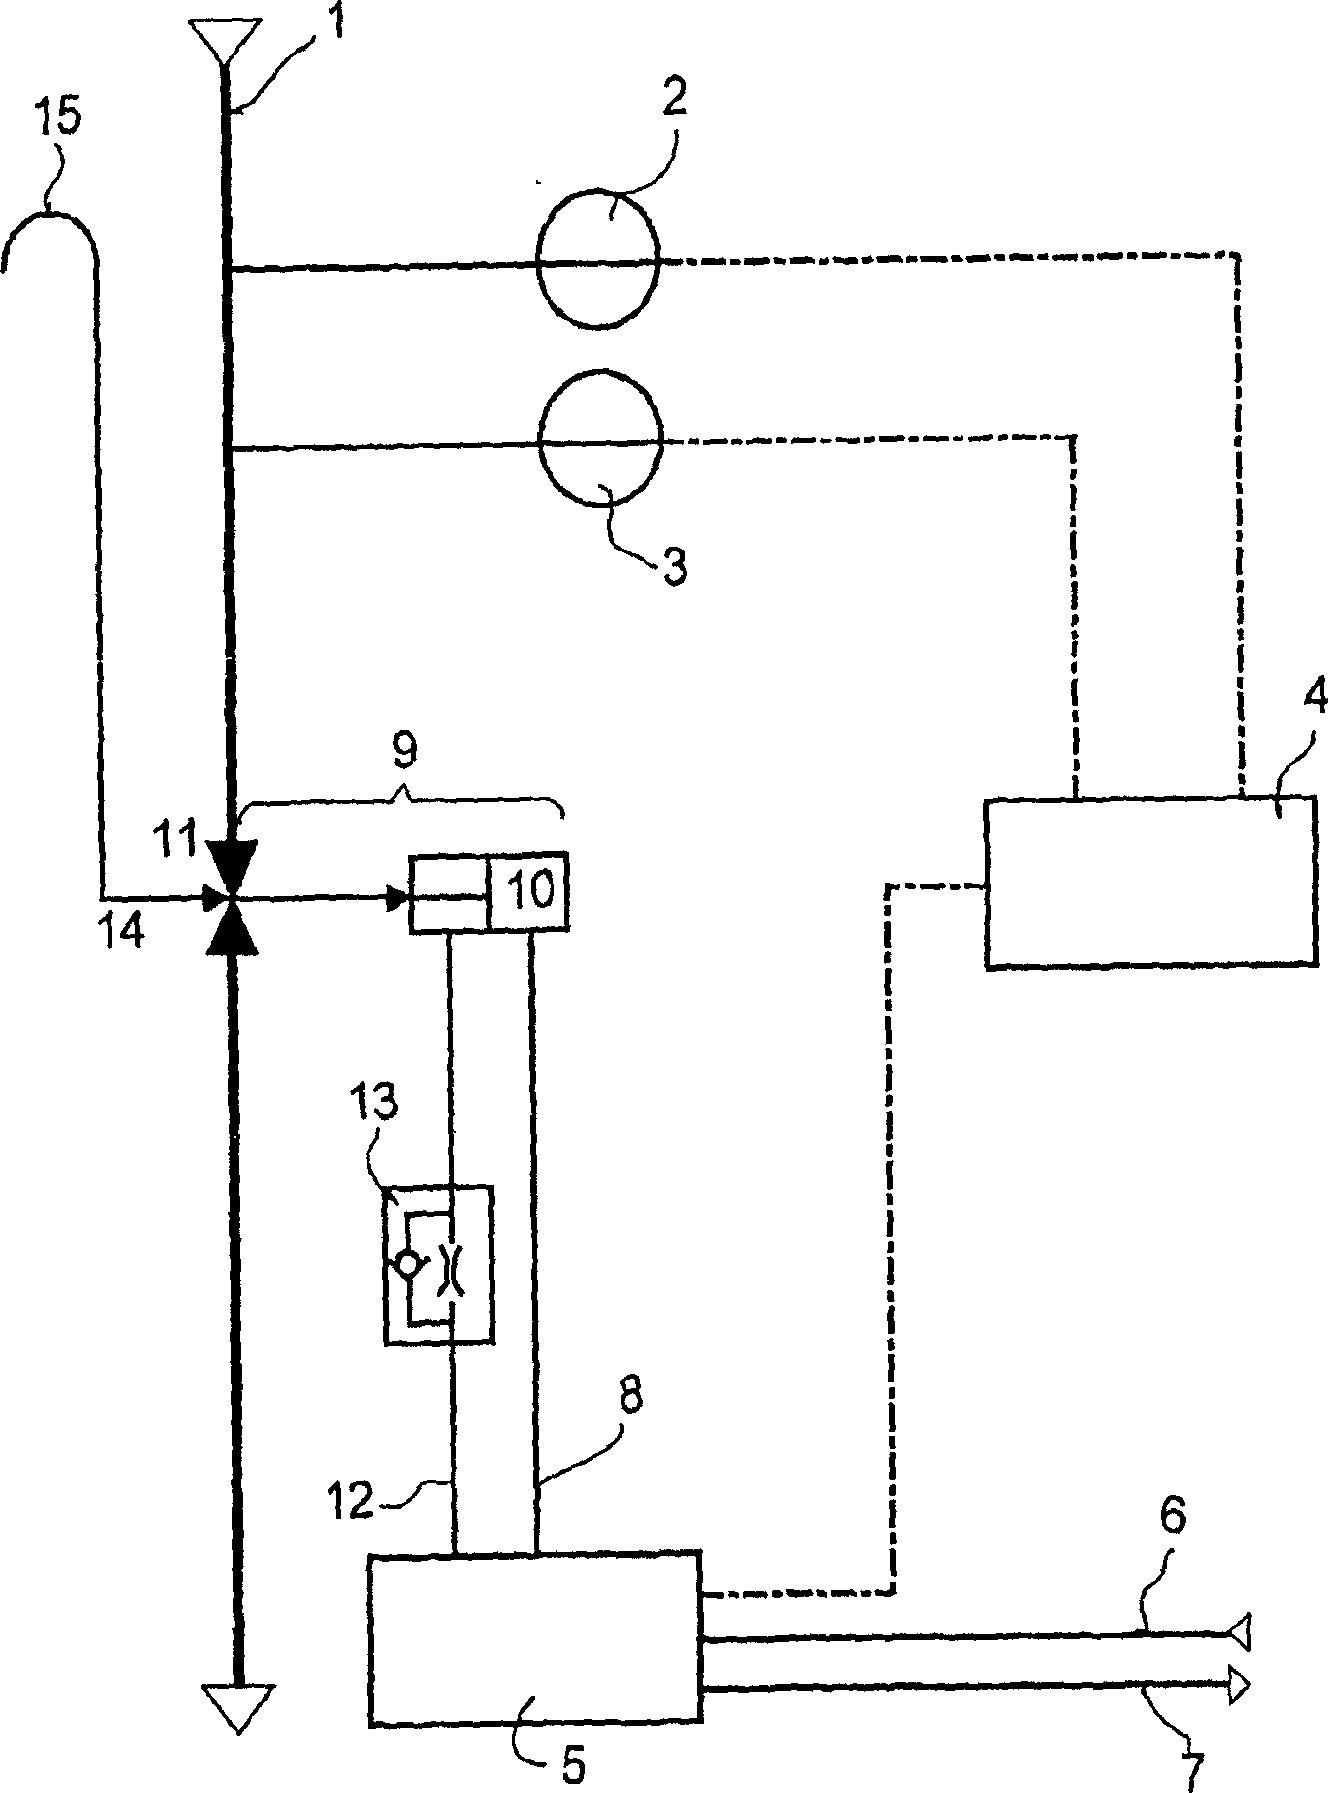 Hydraulically controlled pressure releaf valve for high-pressure reactors